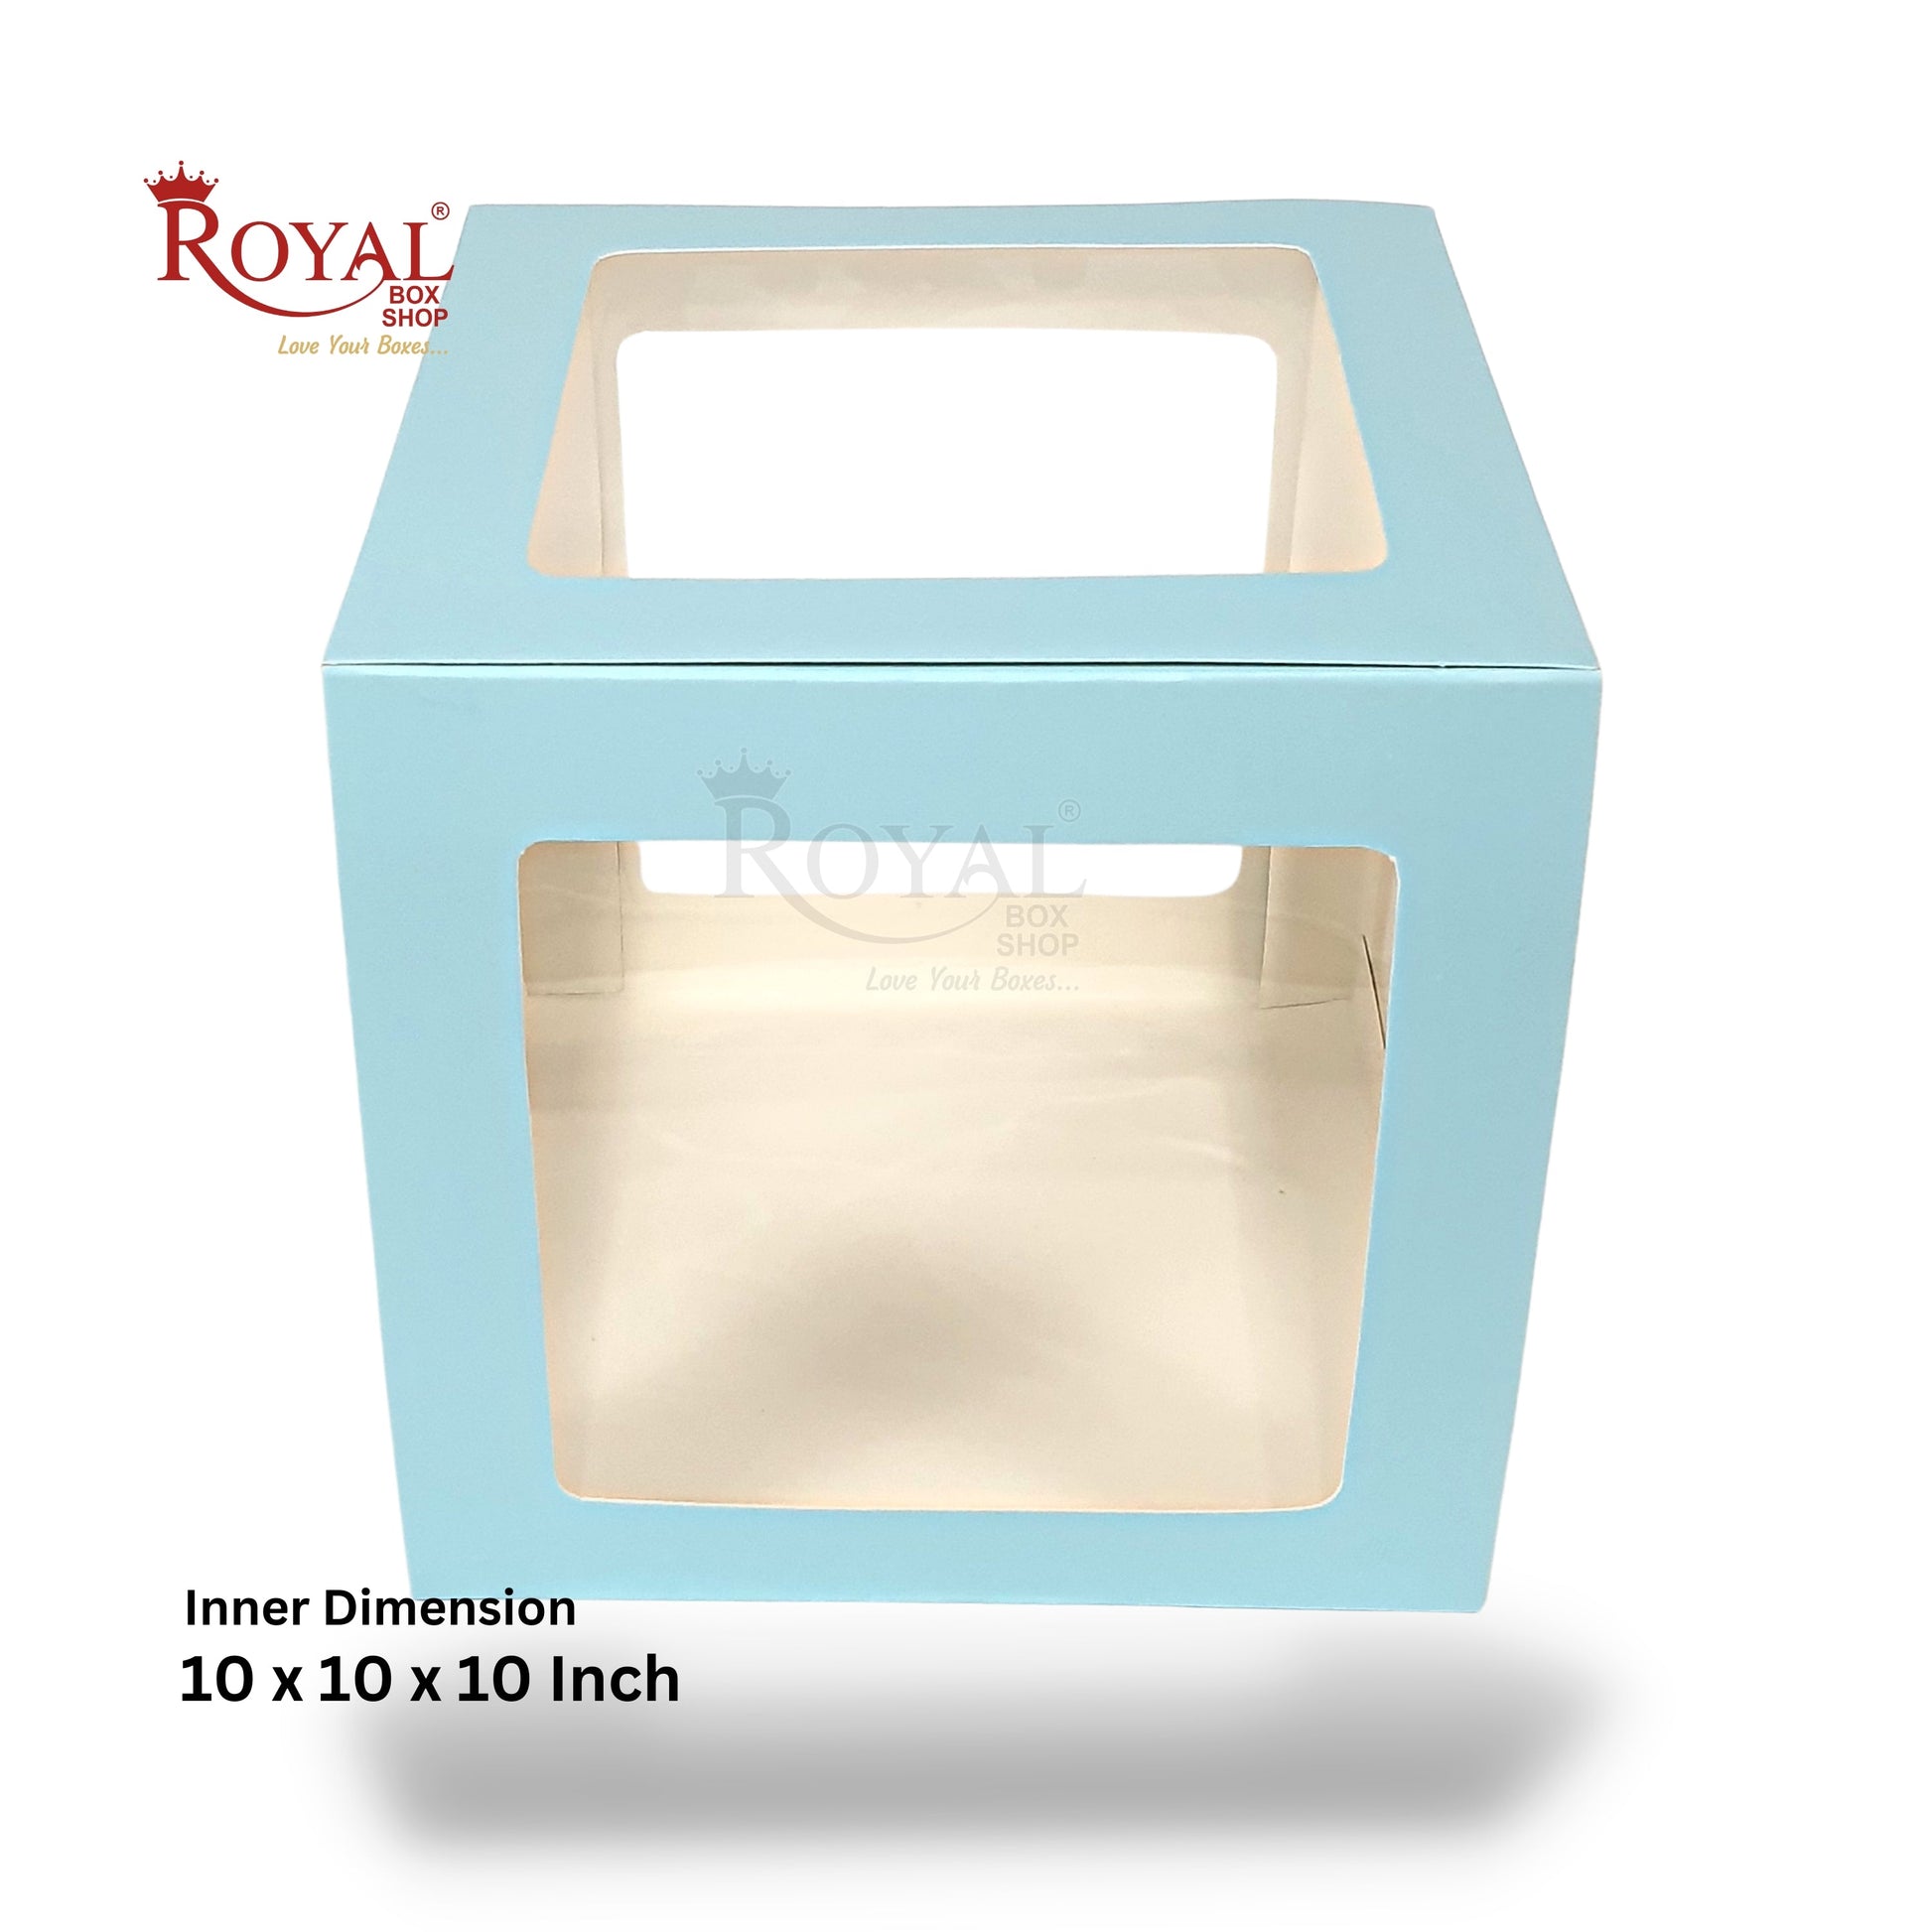 RoyalBoxShop® 5-Window Gift Box I 10x10x10 Inch I Blue I Perfect for Bakery Cakes, Gifts, Parties, Any Occasion Royal Box Shop